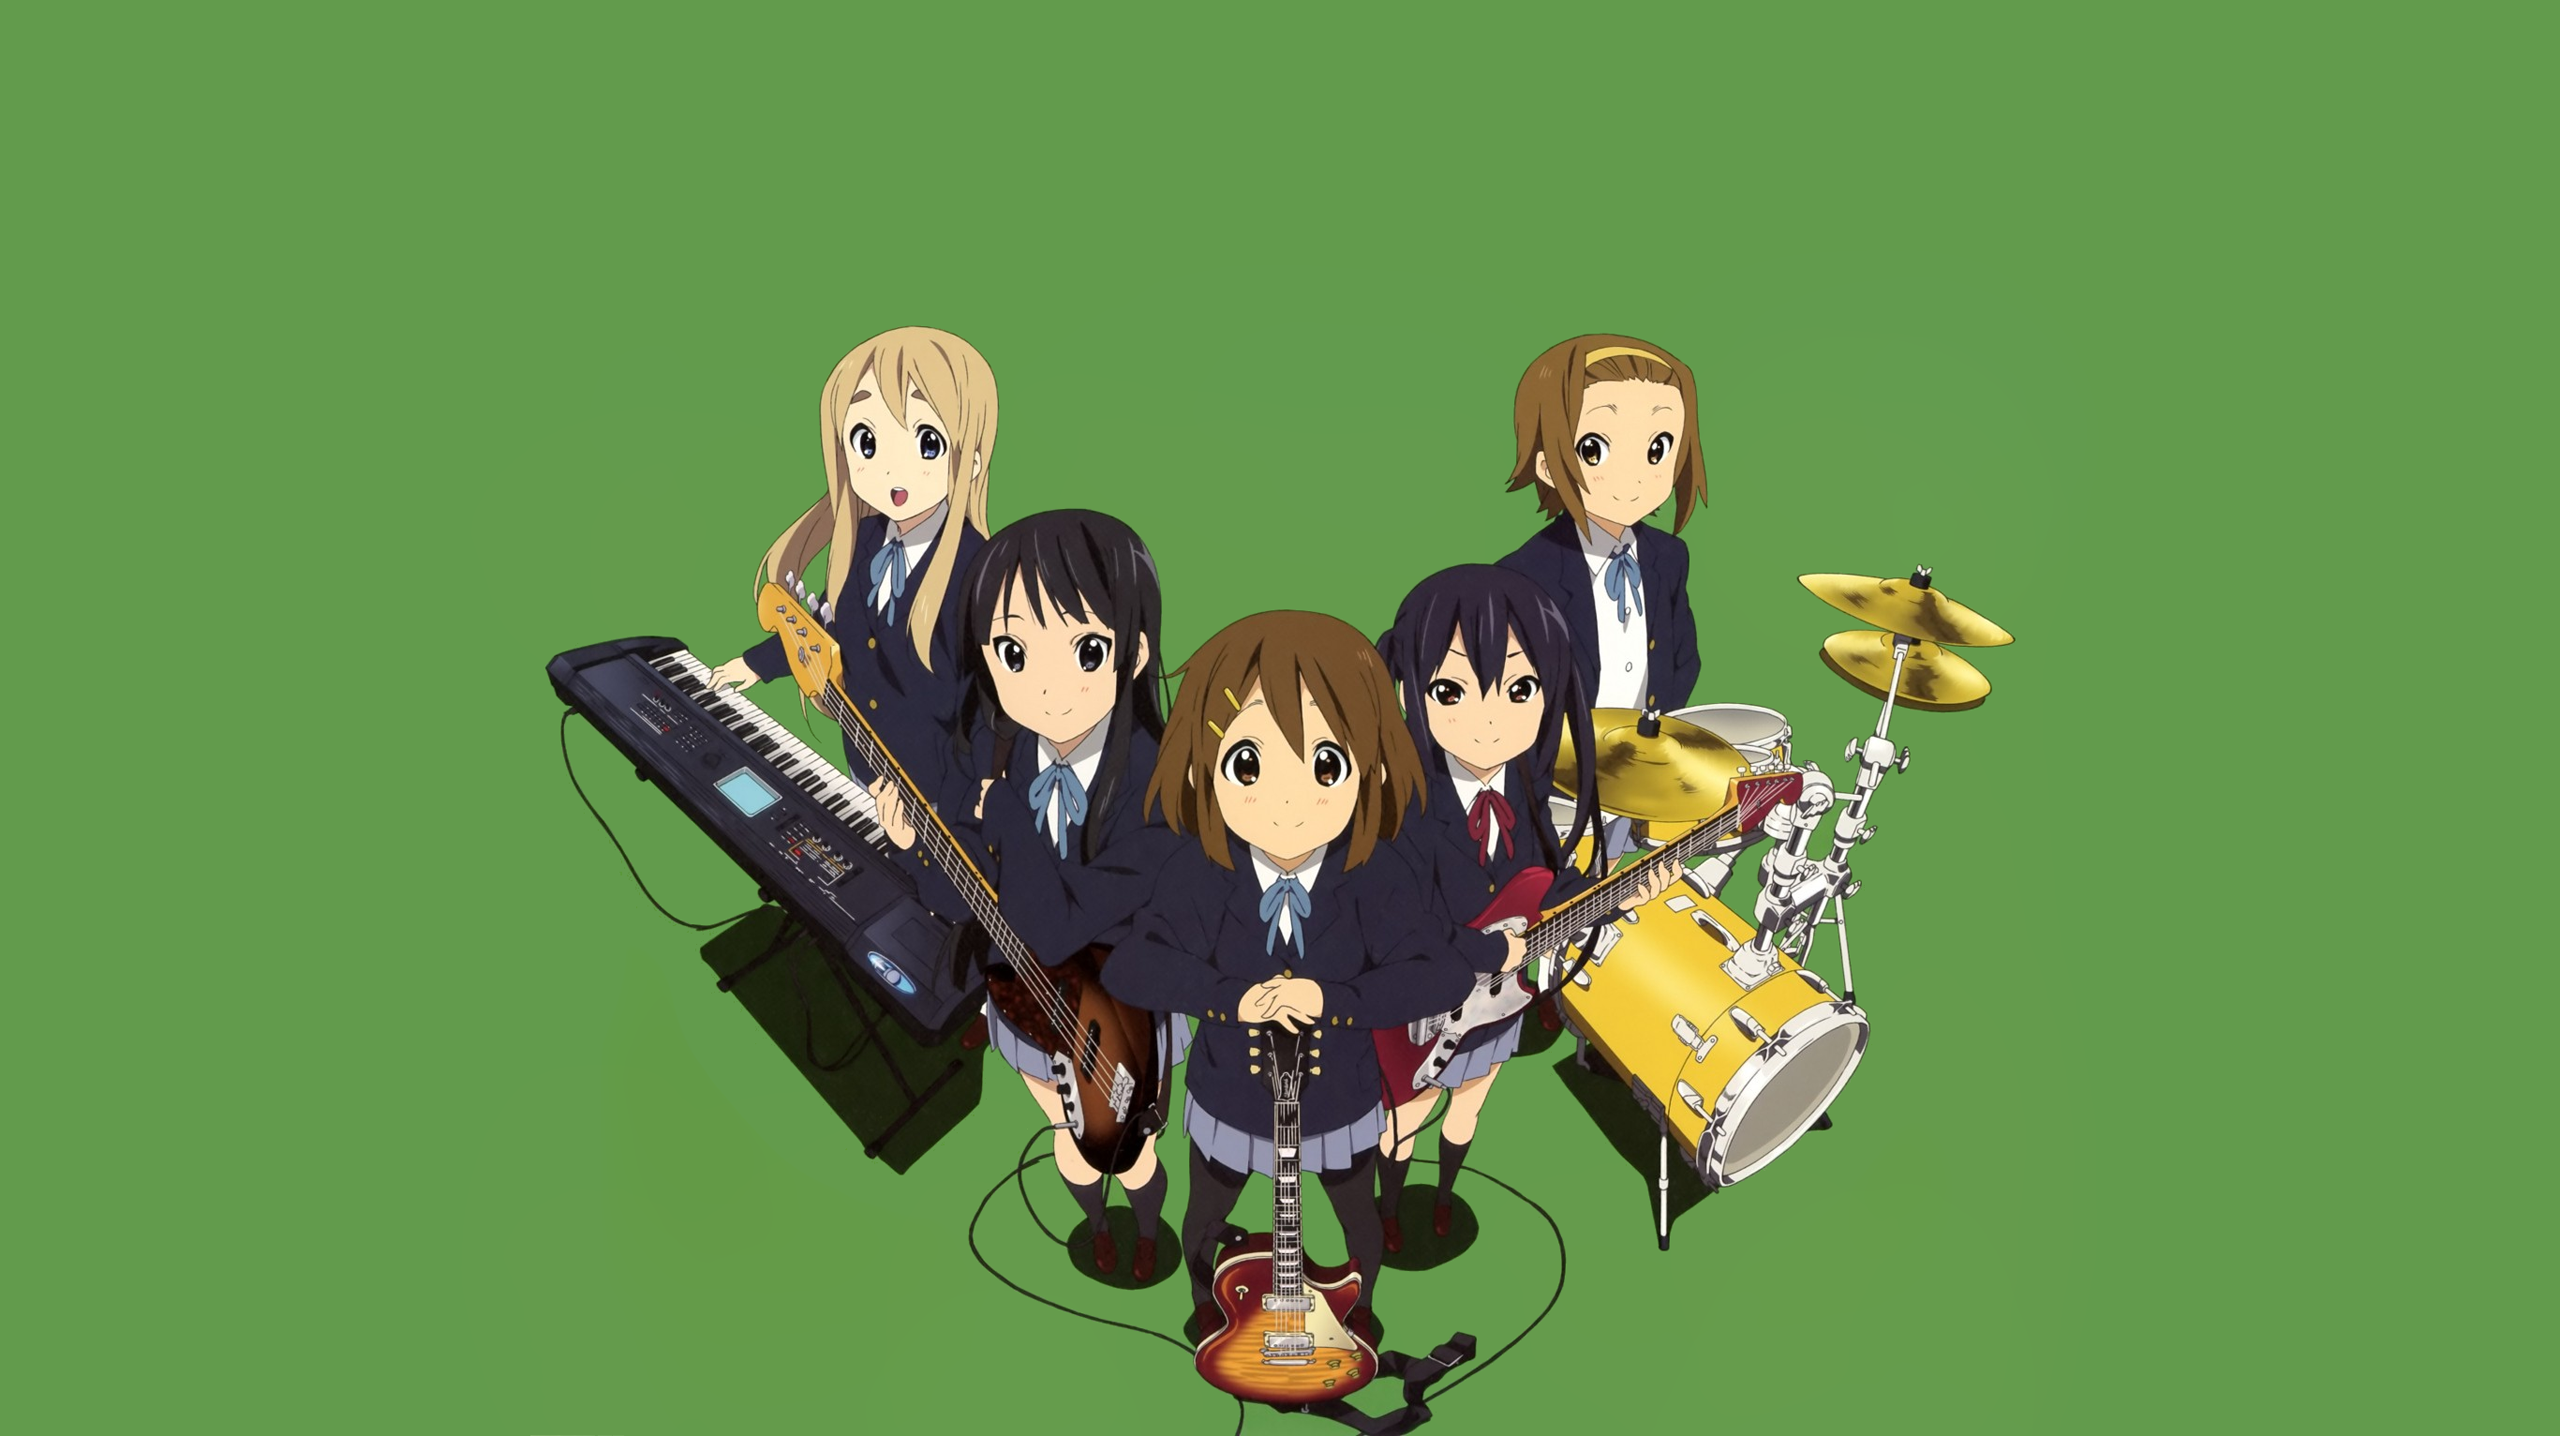 Anime 2560x1436 anime girls guitar musical instrument anime green background band music group of women